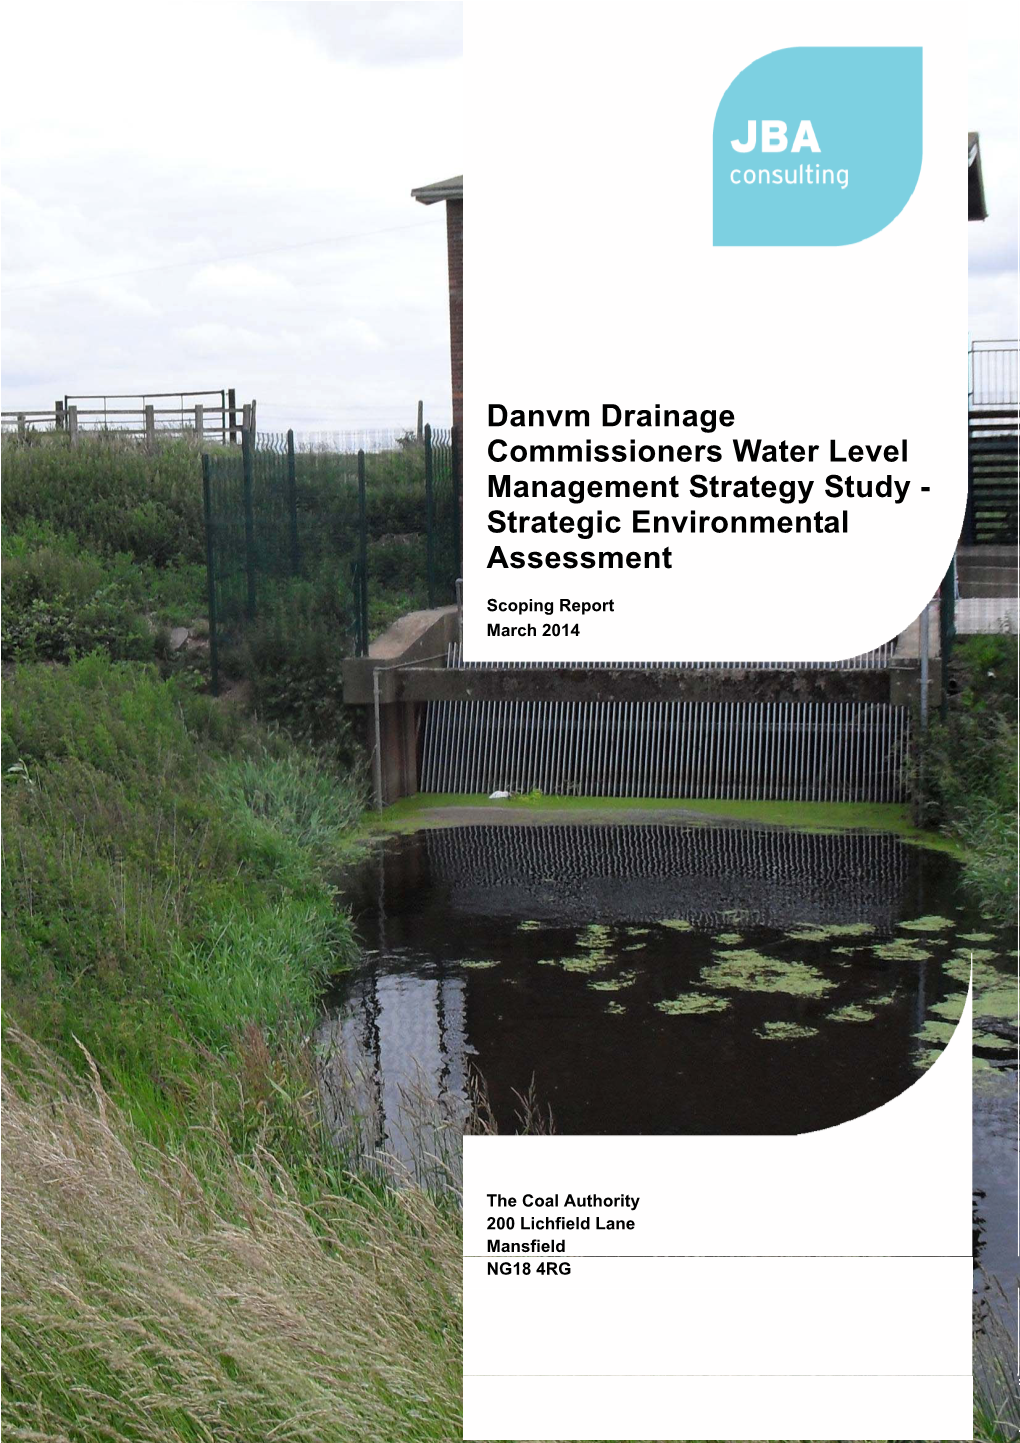 Danvm Drainage Commissioners Water Level Management Strategy Study - Strategic Environmental Assessment